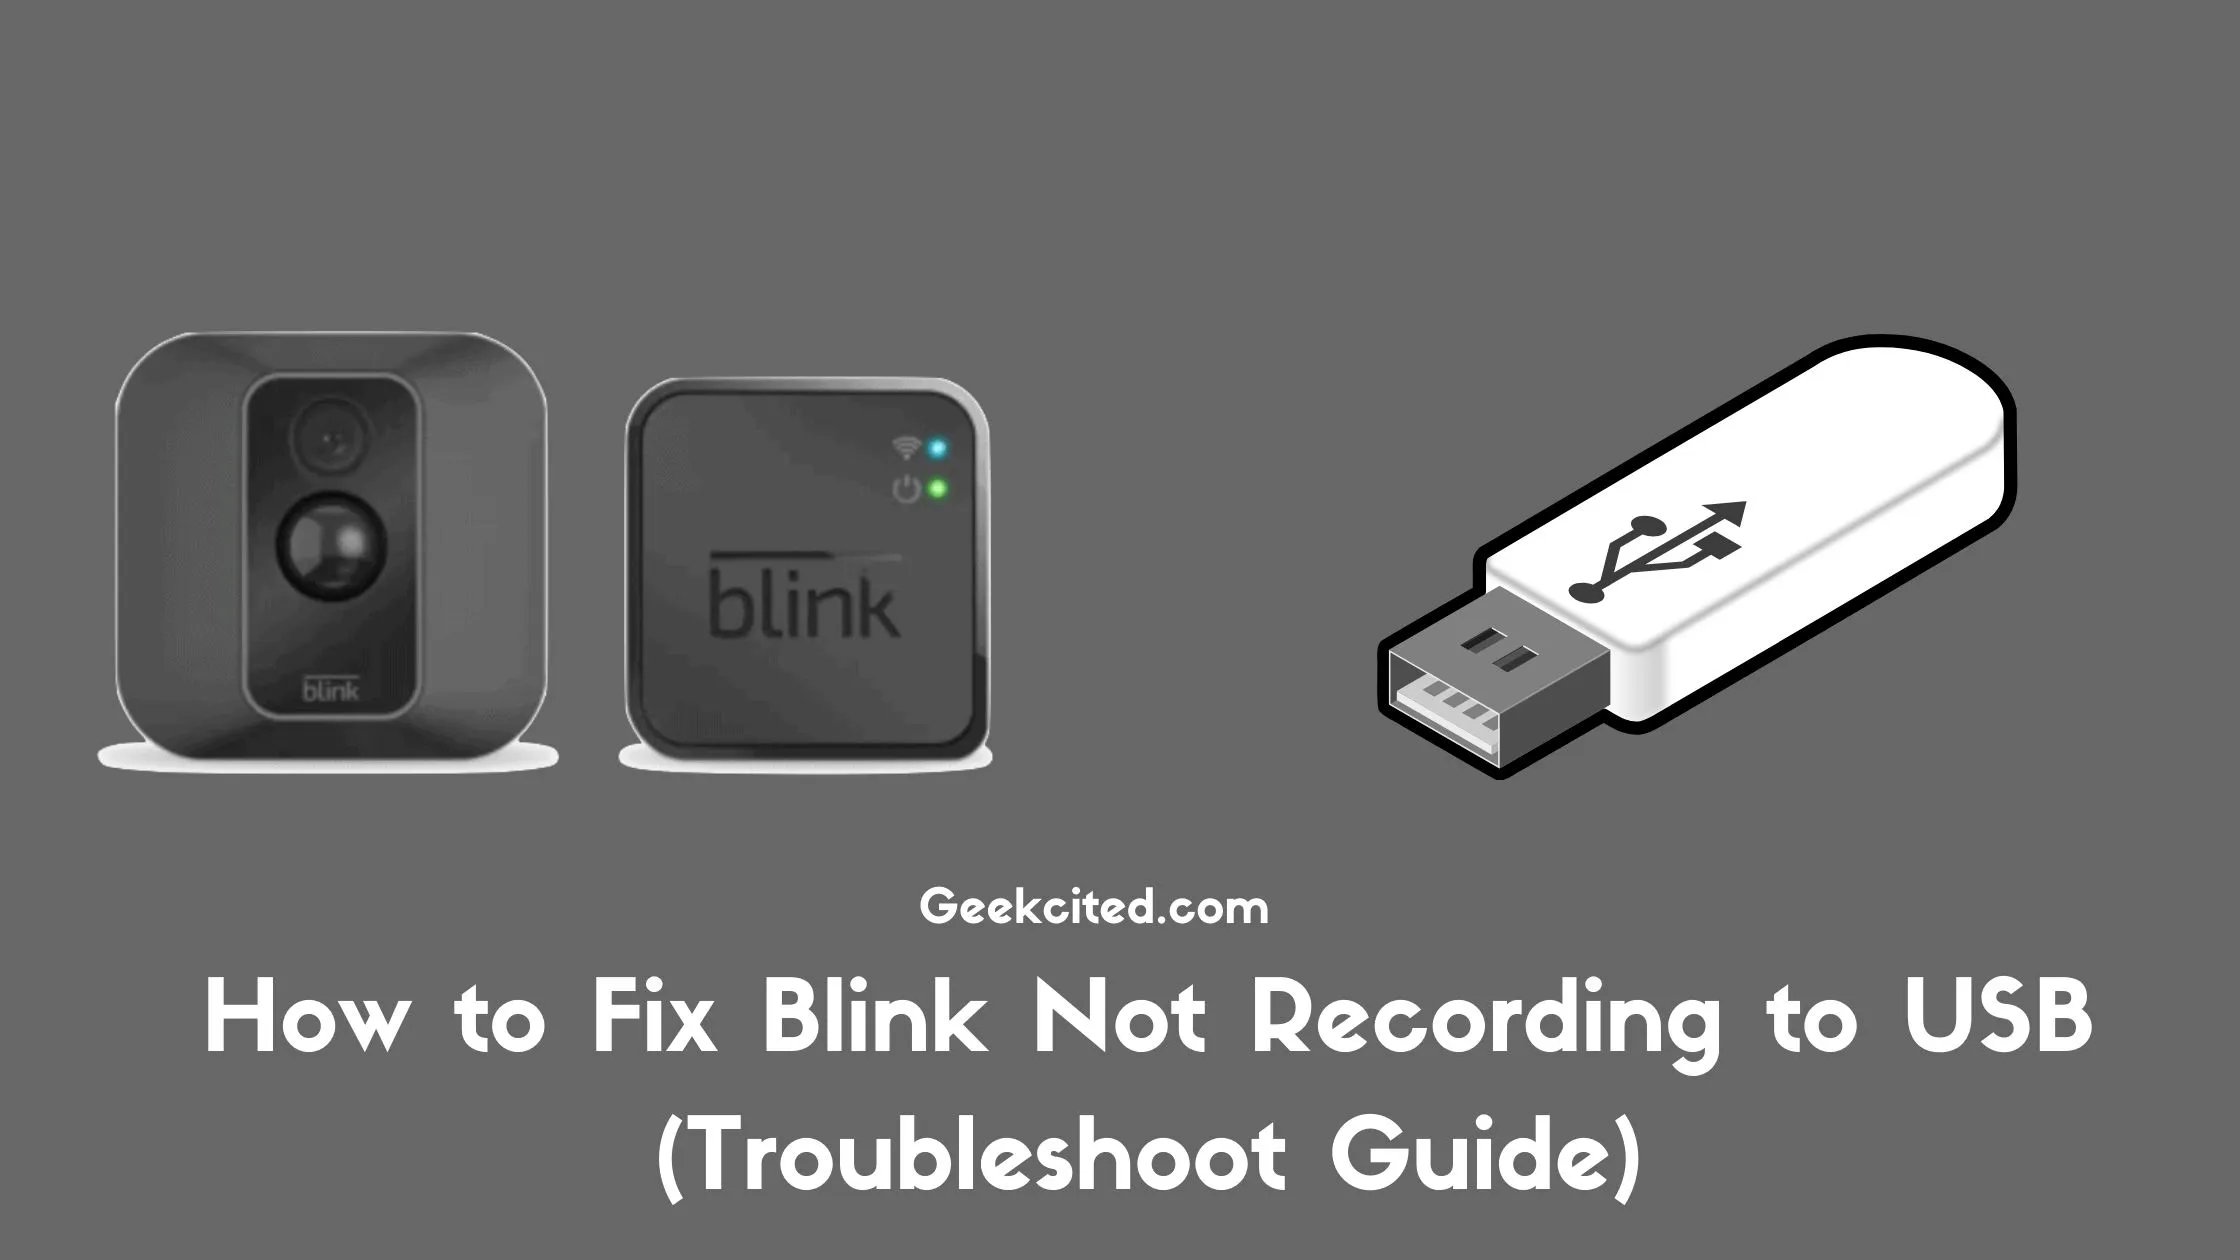 How to Fix Blink Not Recording to USB (Troubleshoot Guide)